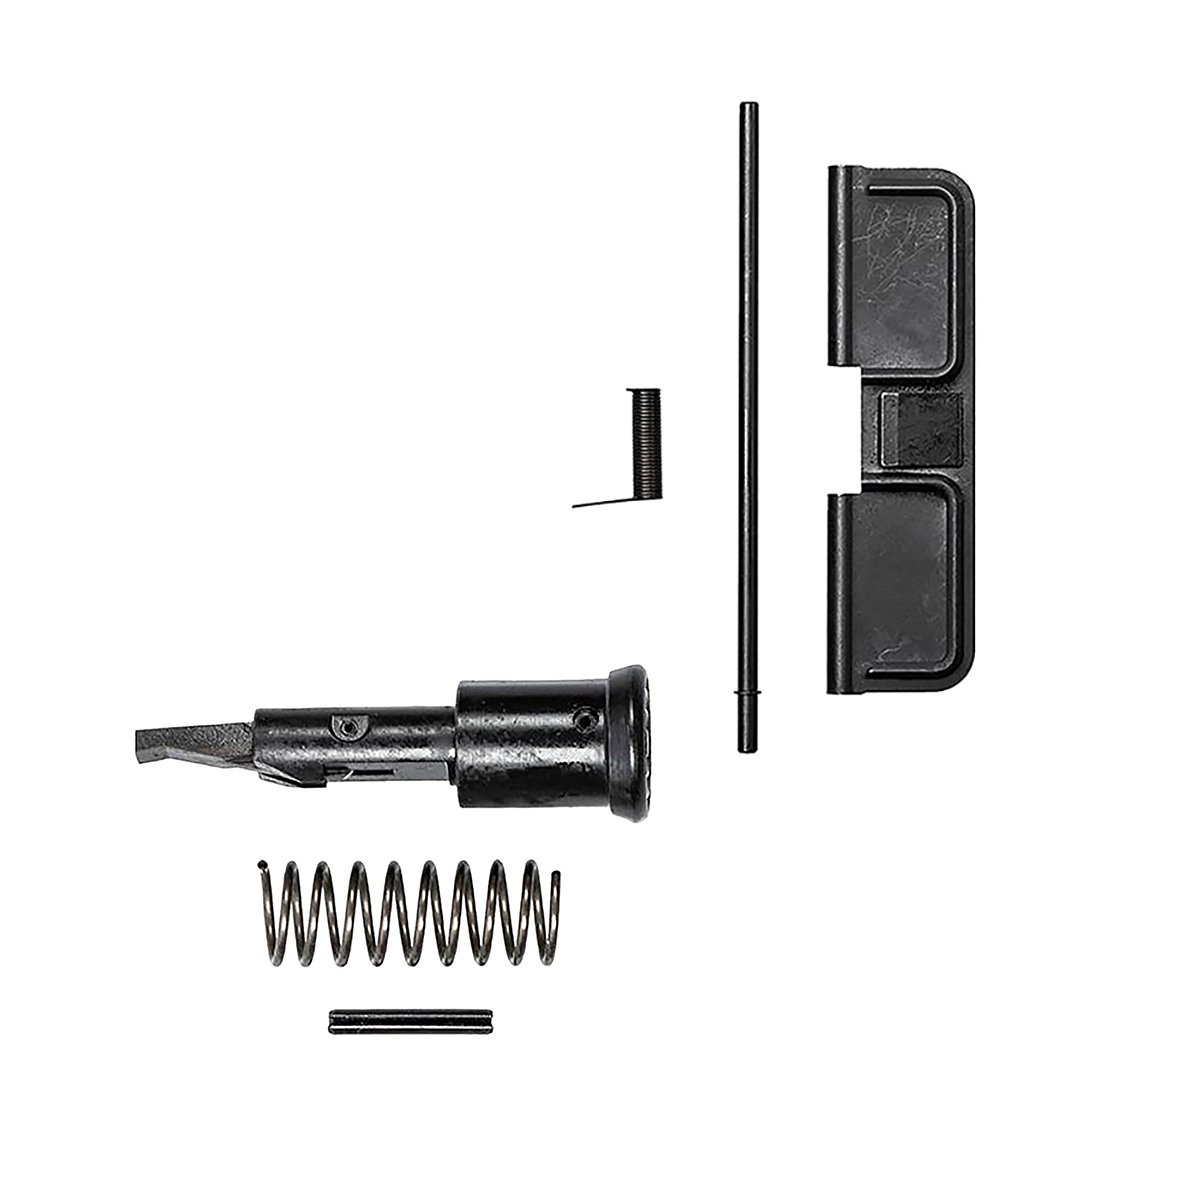 BROWNELLS - AR-15 UPPER RECEIVER COMPLETION KITS